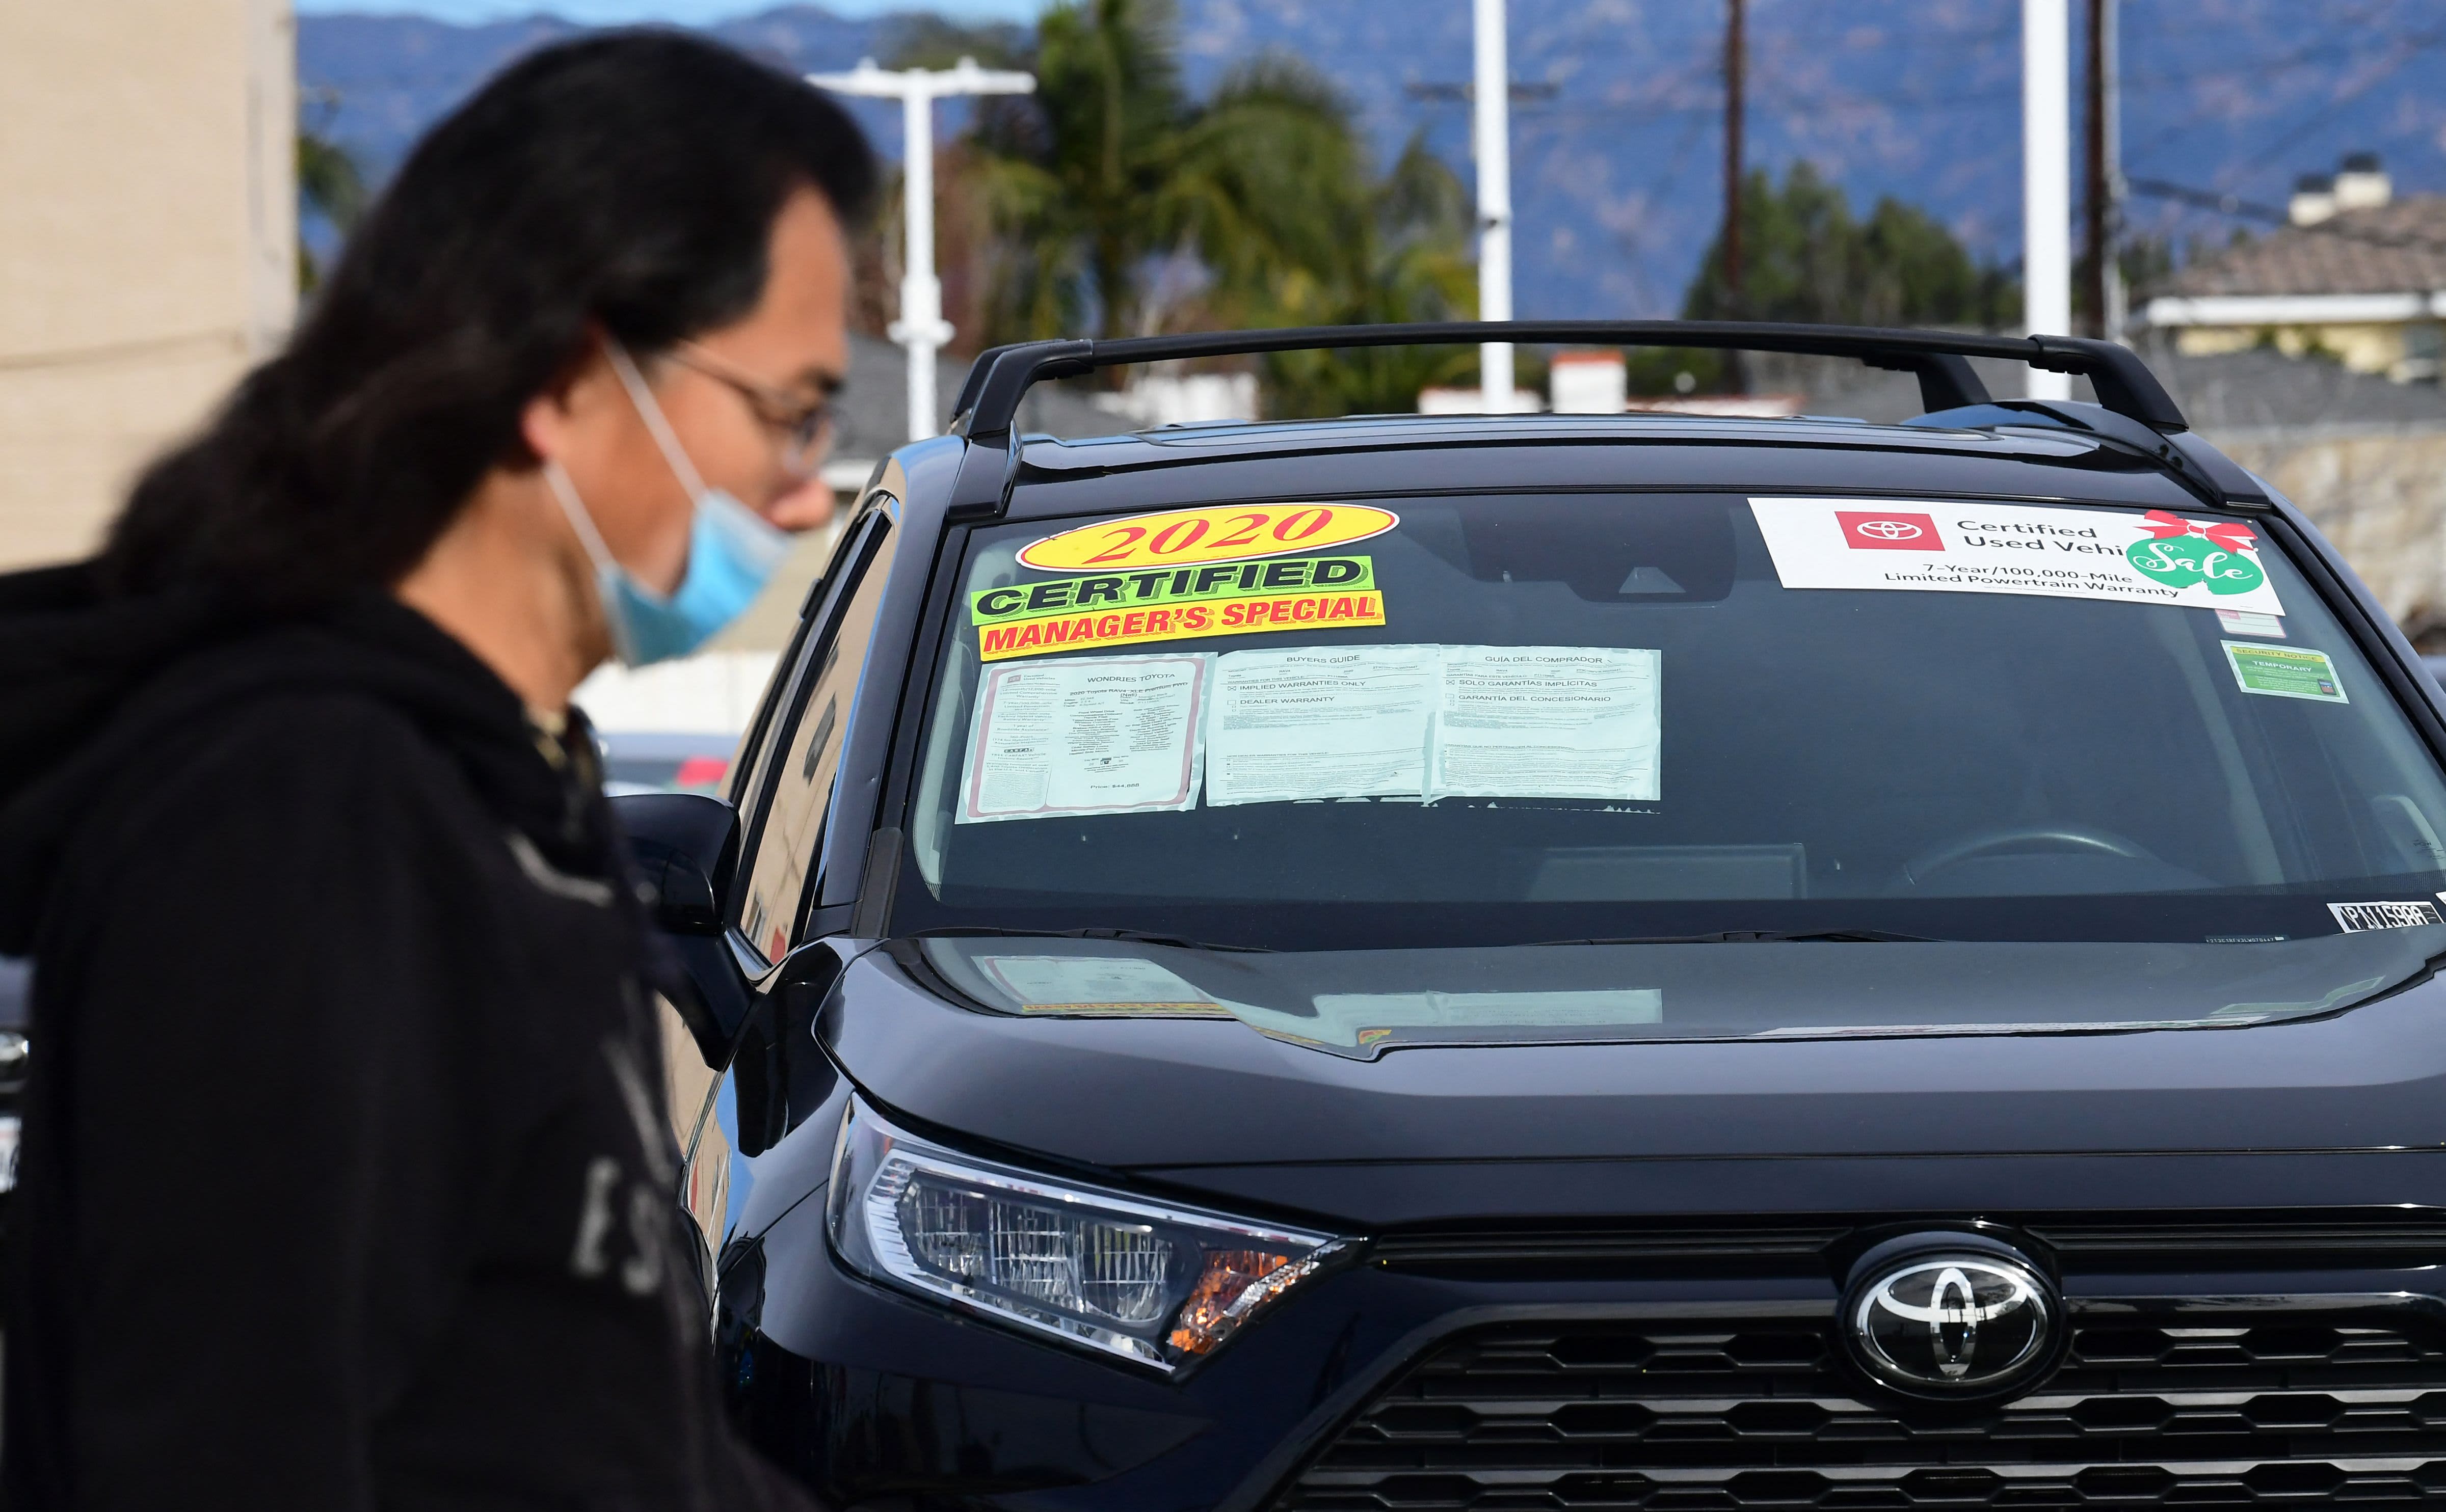 Why used car prices are pushing inflation higher